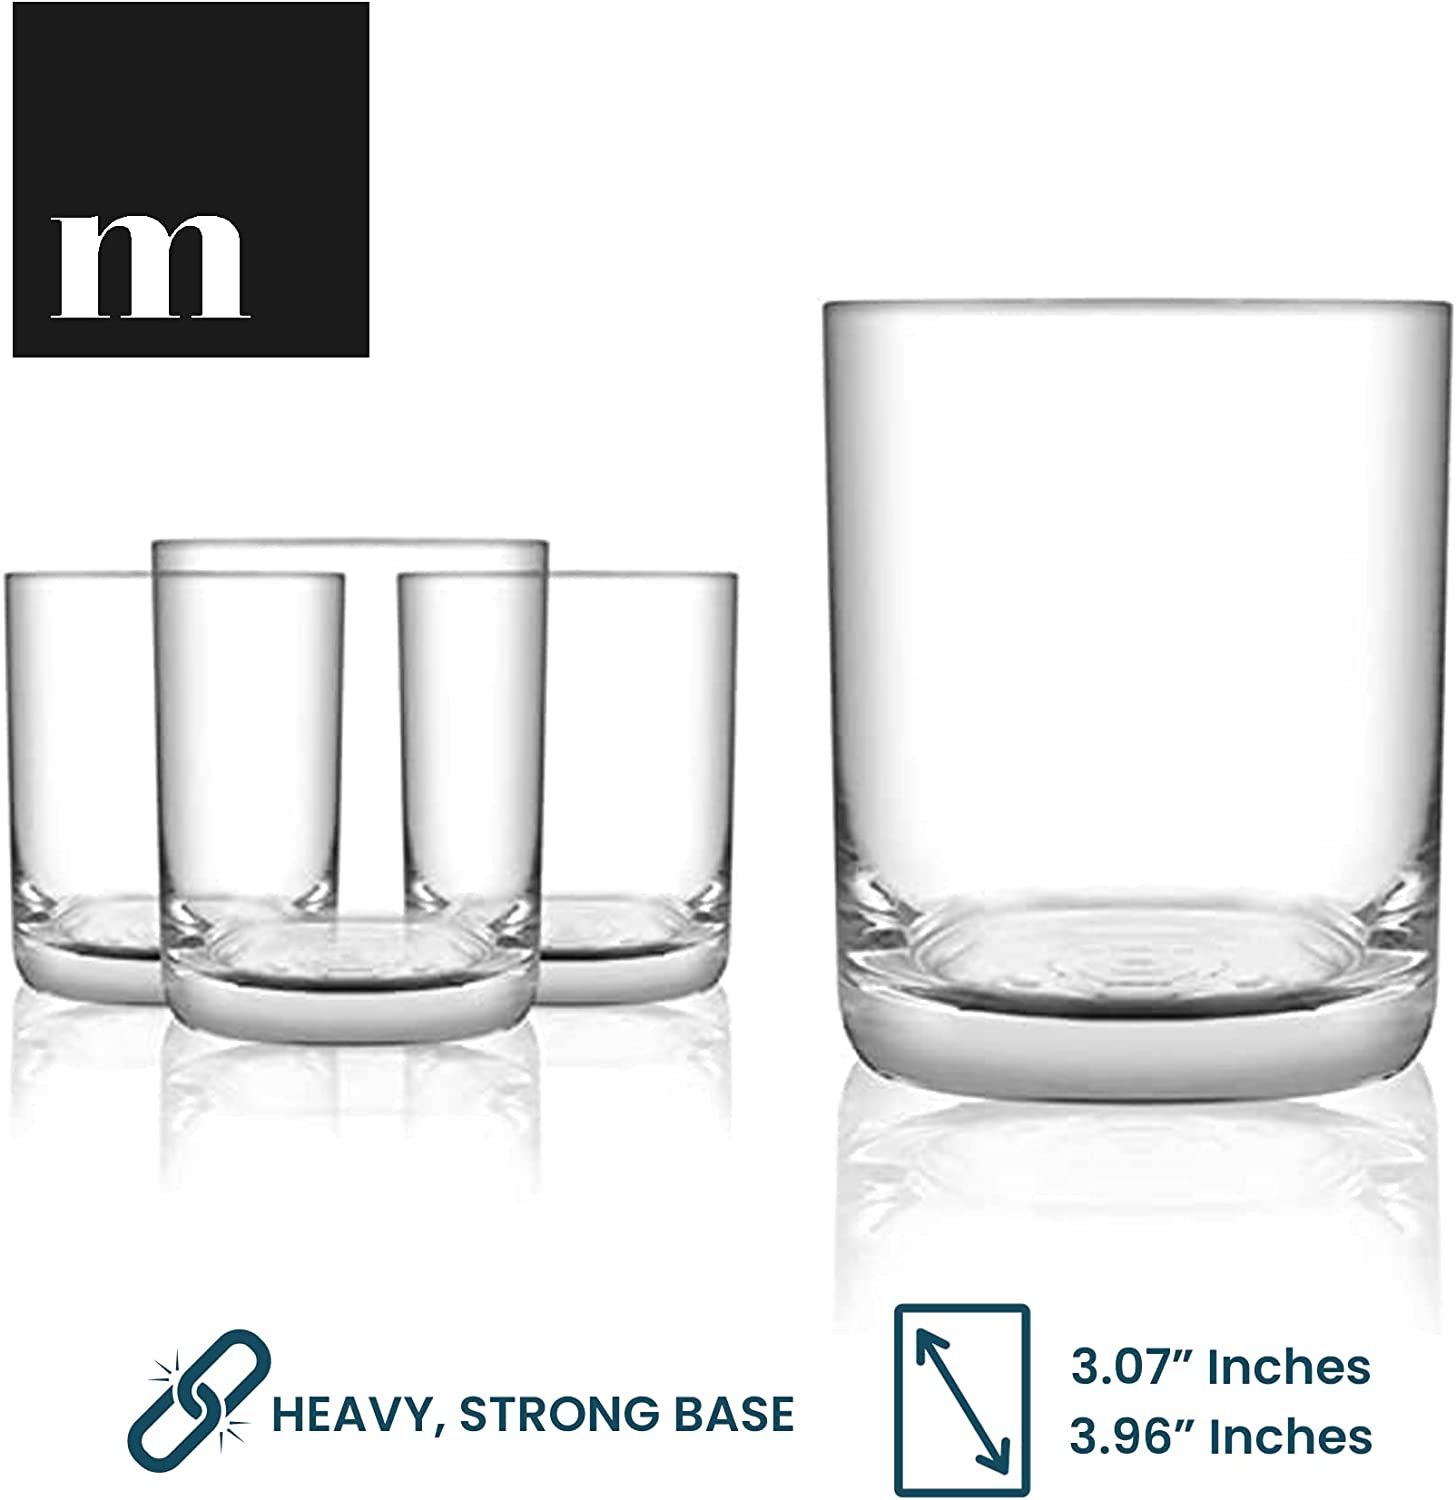 Old Fashioned Whiskey Glasses (6 Pack)